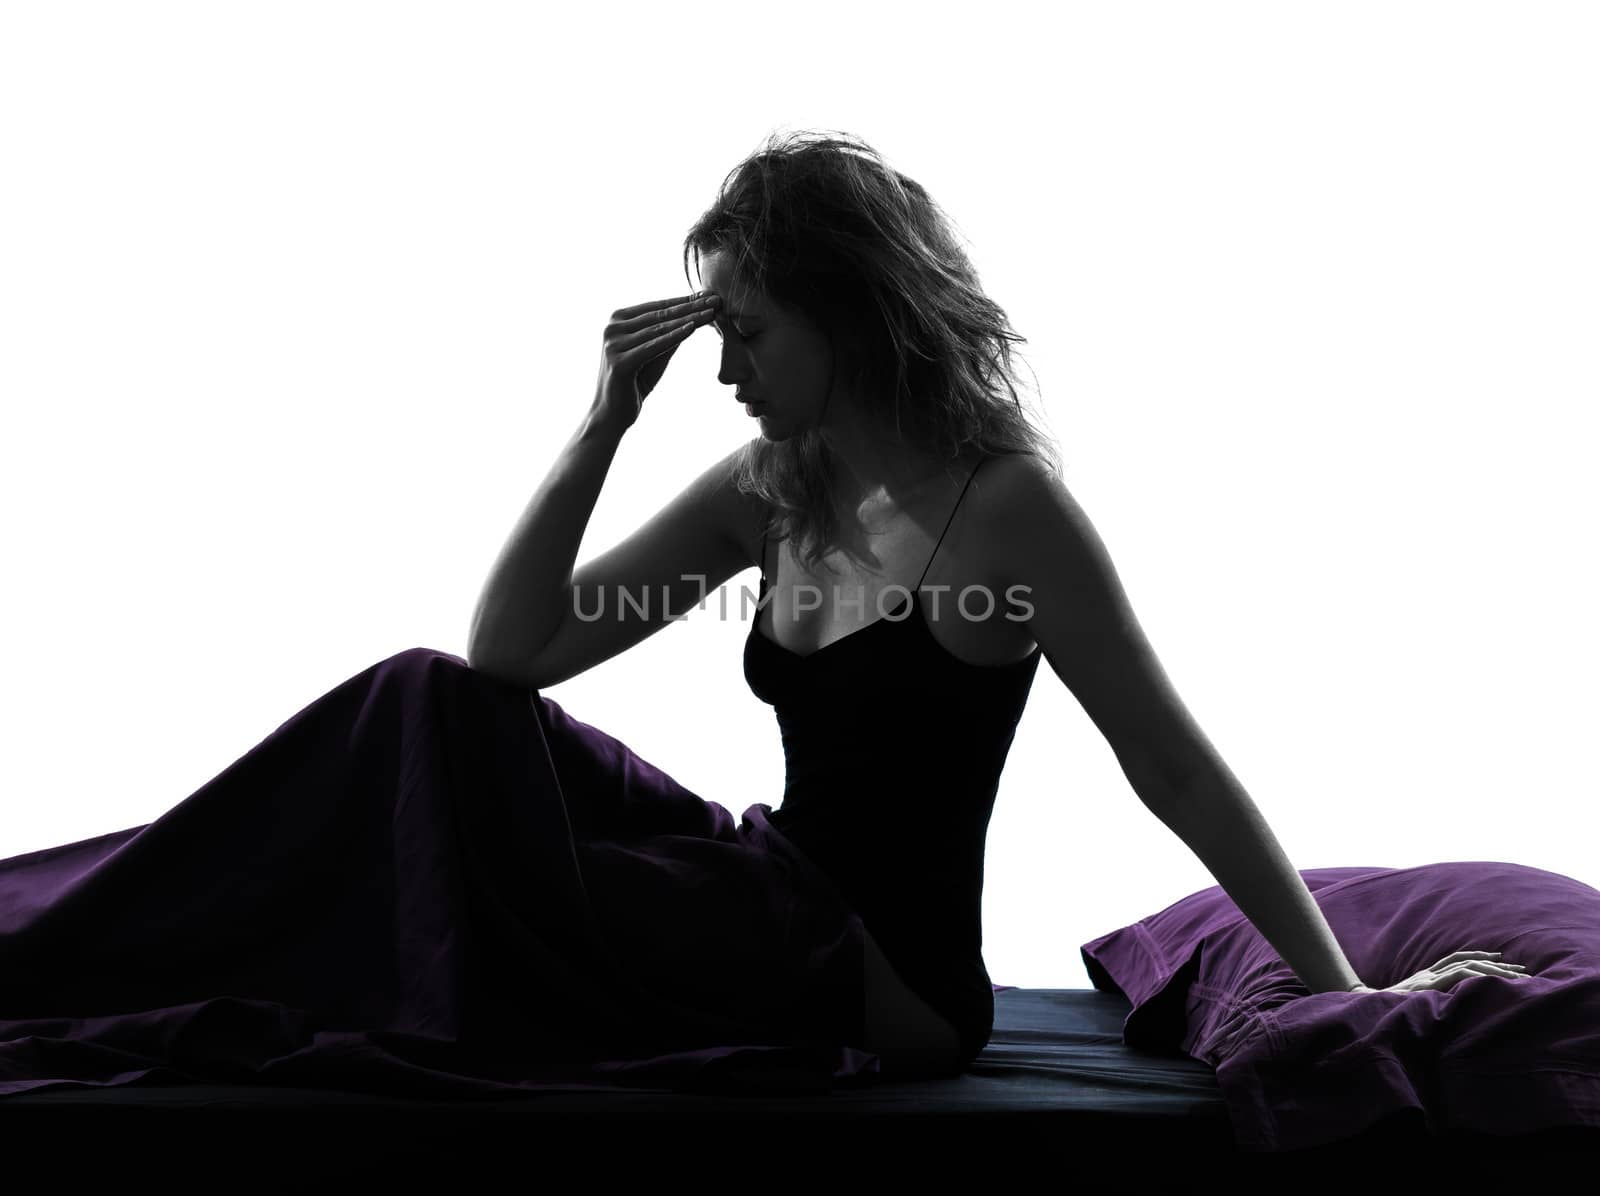 one woman headache hangover sitting on bed silhouette studio on white background